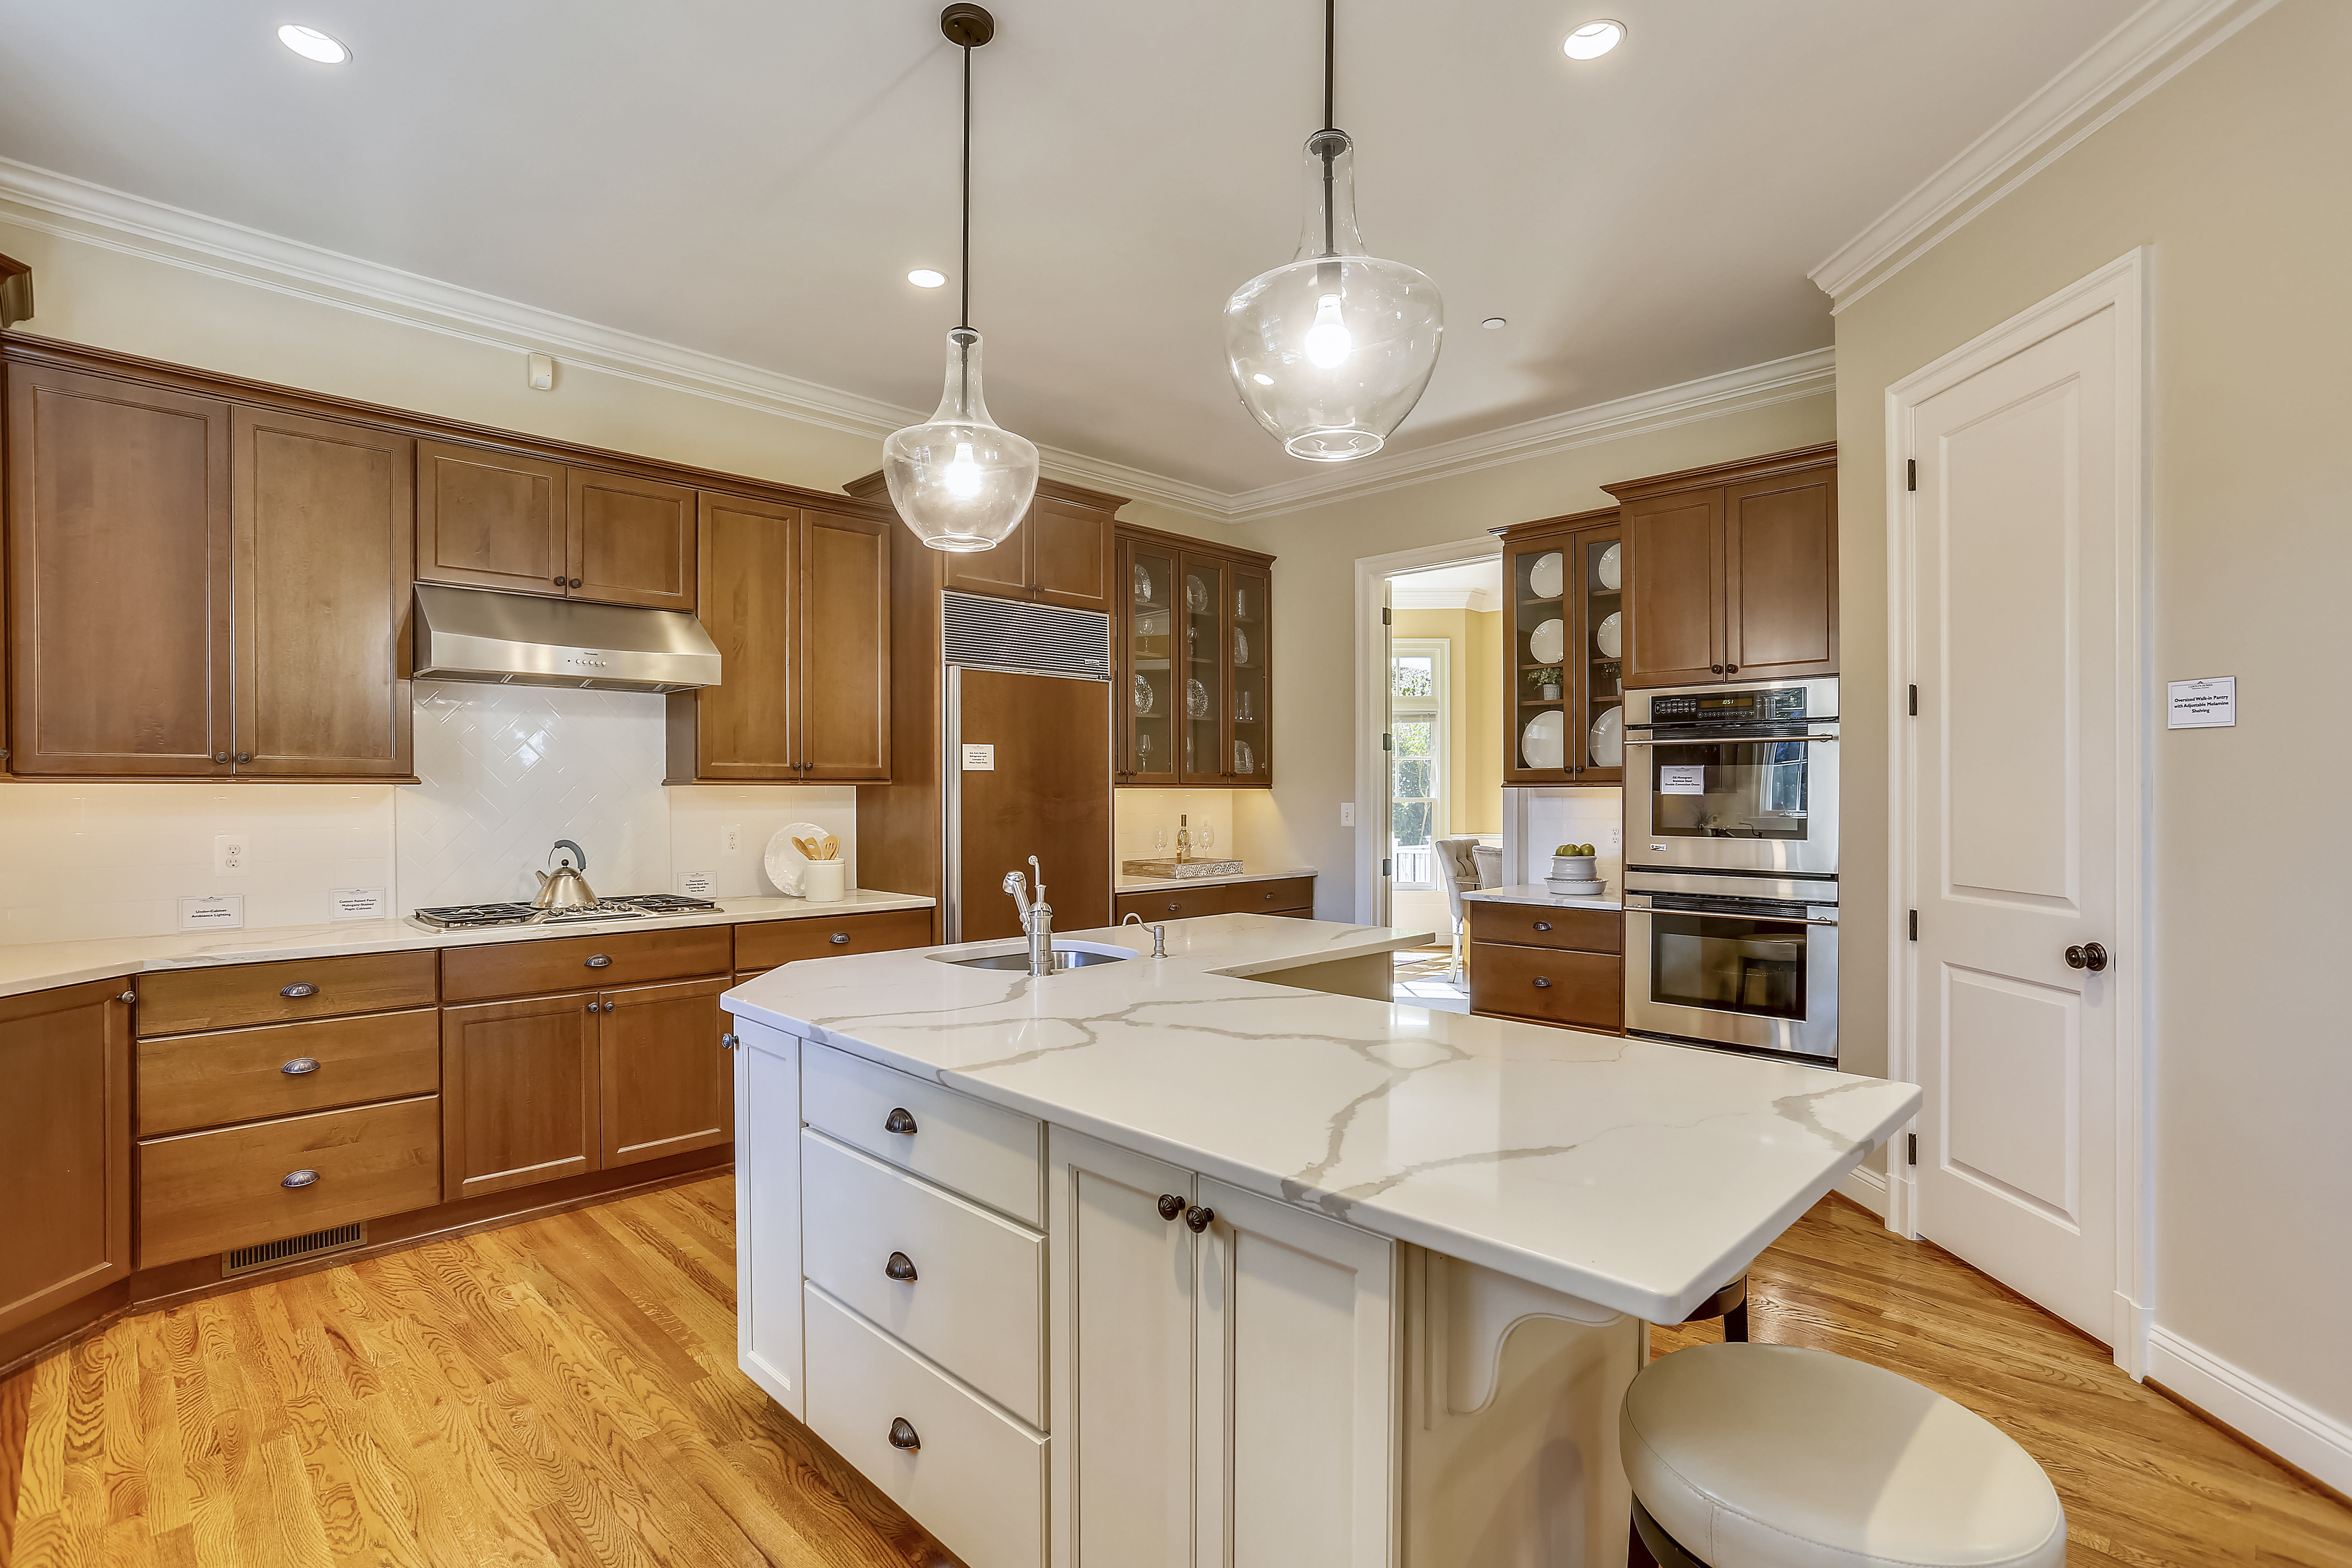 Check out NEW PRICE & Extensive Updates on Bethesda Craftsman during weekend OPEN HOUSE